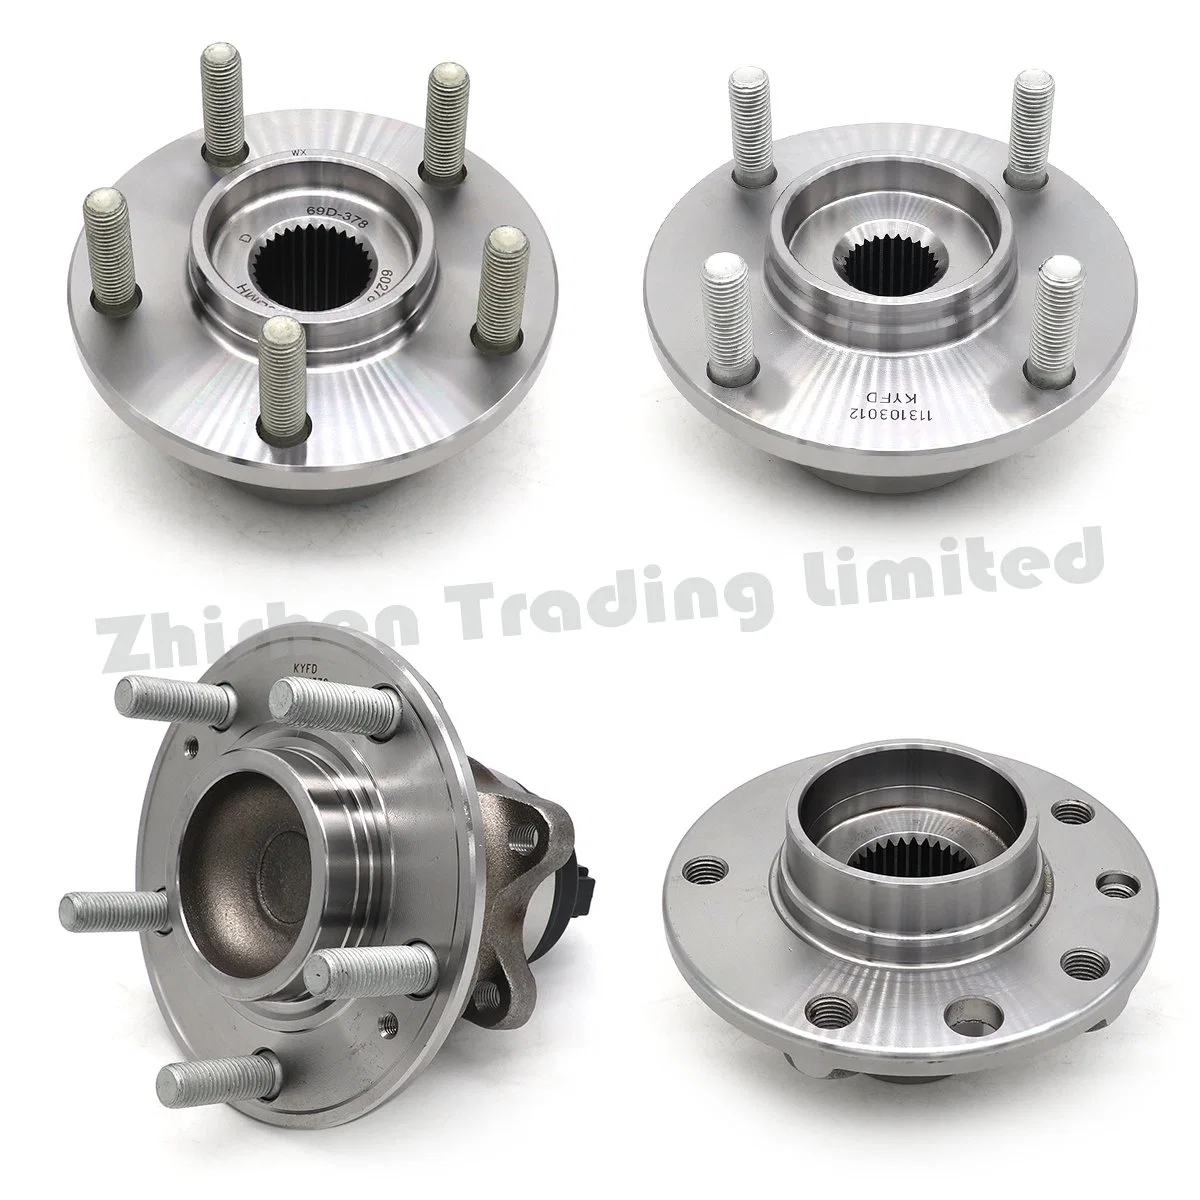 Baic Auto Spare Part Auto Accessory Car Spare Part Vehicle Part Automobile Part Auto Body Part Wheel Hub Bearing Assembly Front and Rear Bearing Head for Bjev